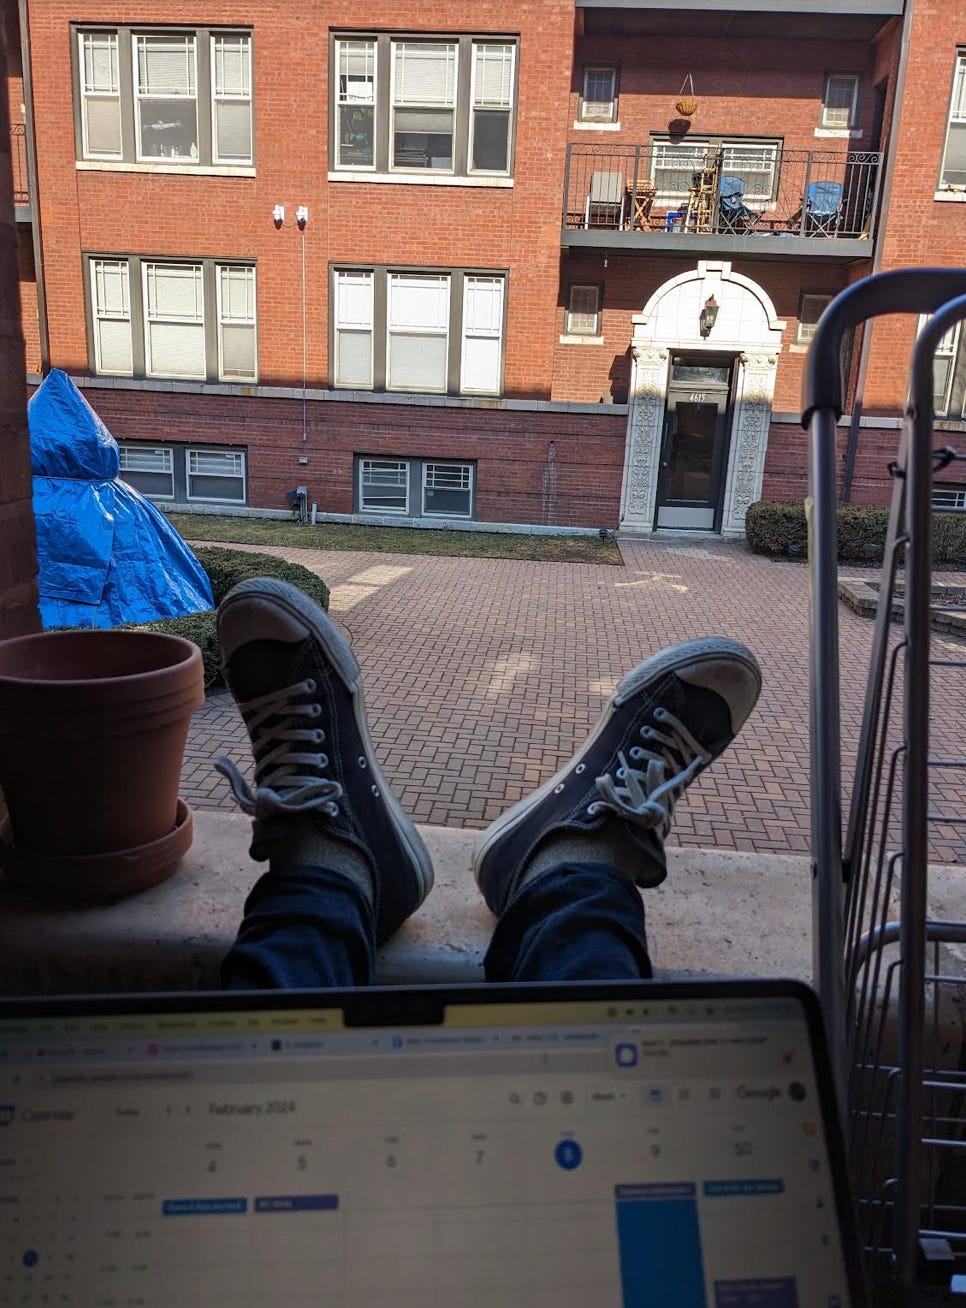 A laptop is on Nathalie's lap as she overlooks the view from her balcony. Her feet are propped up on the balcony sill next to an empty plant pot. Her view is of a red apartment building with an exposed balcony on the top floor 